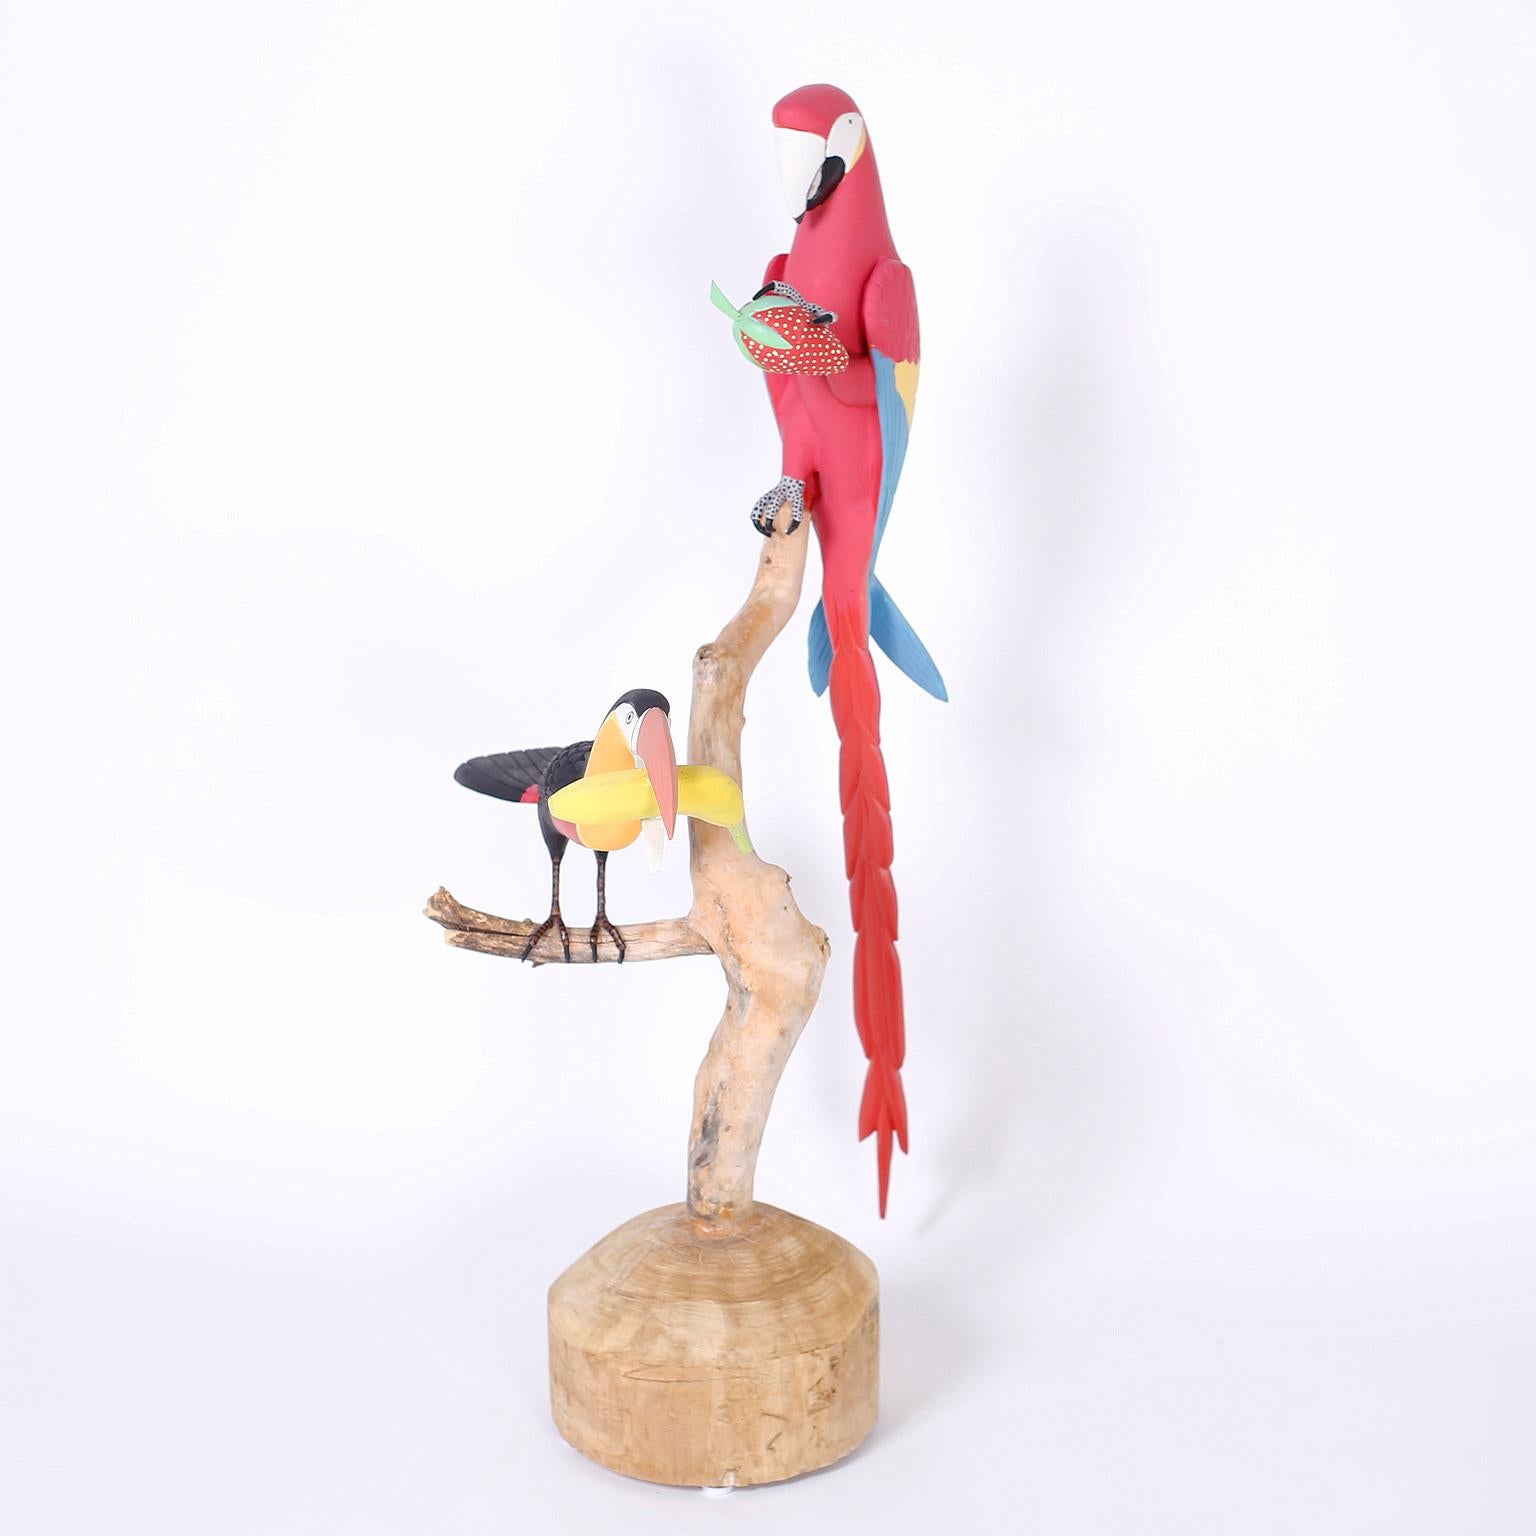 Sculpture of a parrot with a strawberry and a toucan with a banana created in wood and decorated with tropical colors. Signed by the noted artist Leroy Ortega on the bottom.